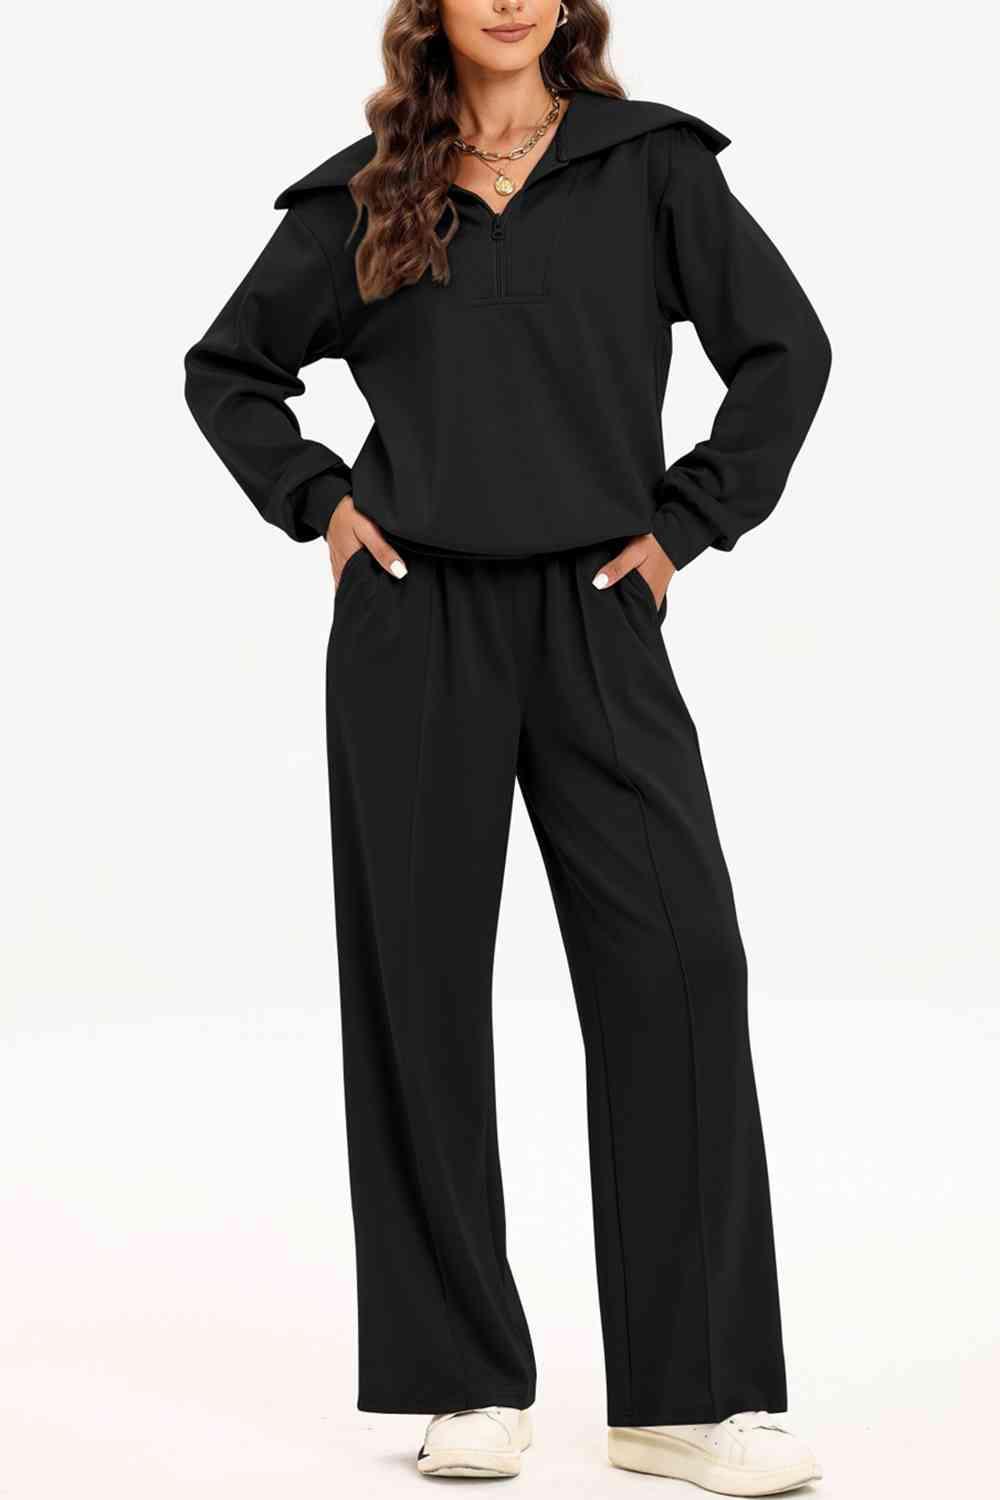 a woman wearing a black jumpsuit and white shoes